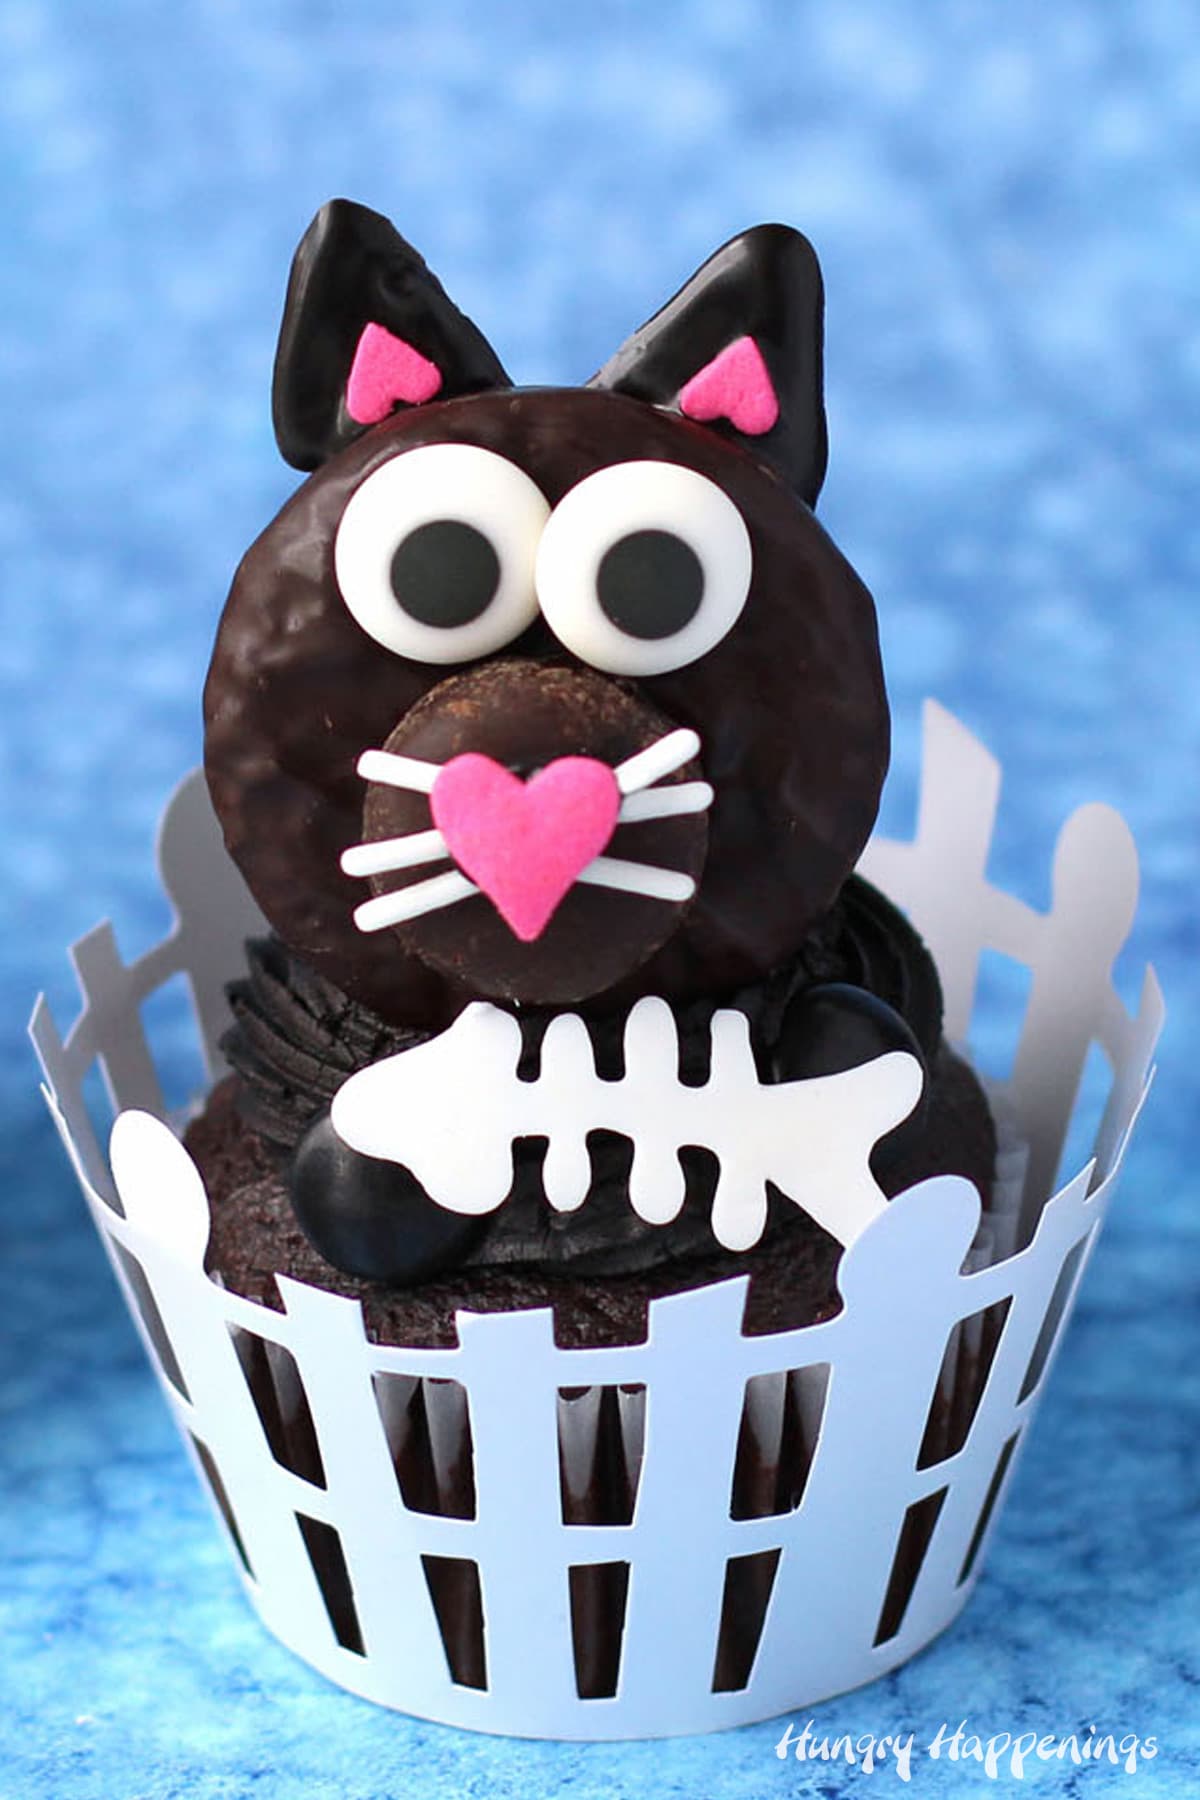 chocolate Halloween cat cupcakes topped with a swirl of black frosting, a Peppermint Patty cat, and white chocolate fish bones.